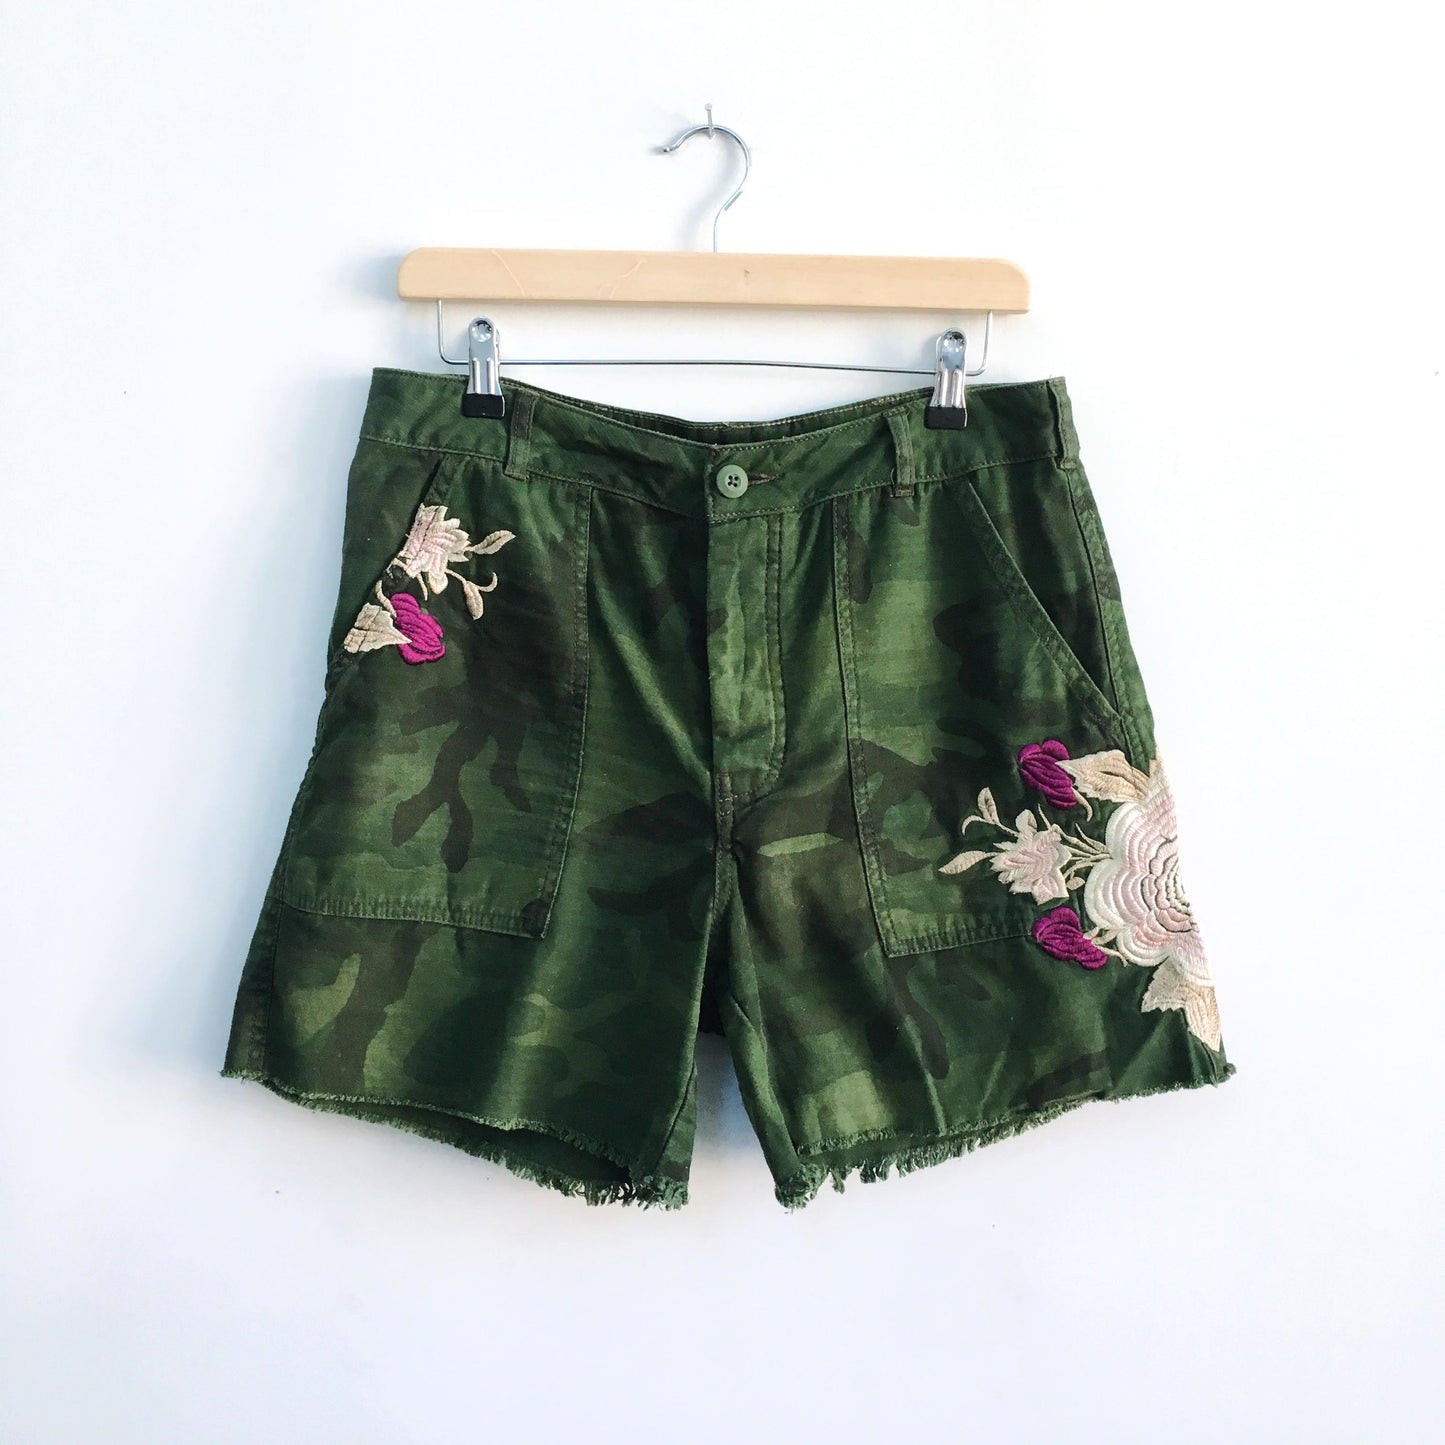 Free People Embroidered Scout Shorts - size 10